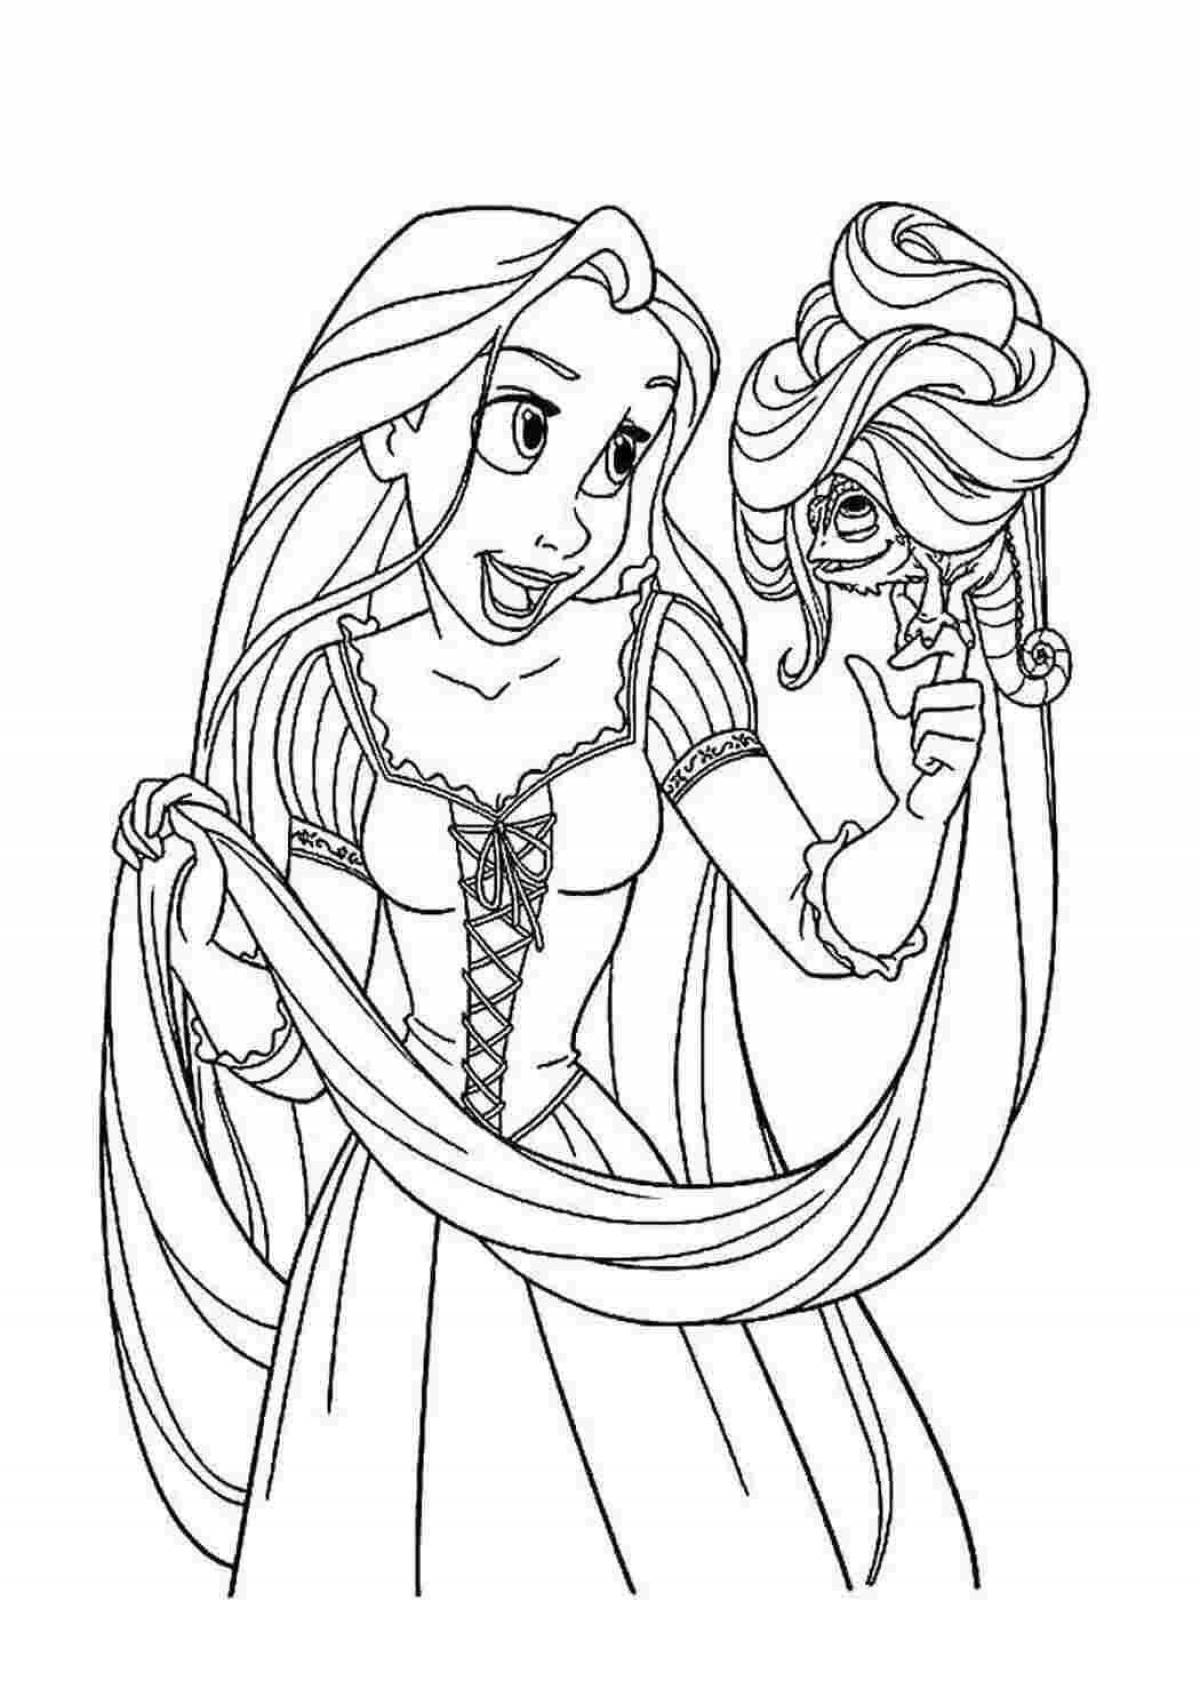 Terrific rapunzel coloring book with clothes